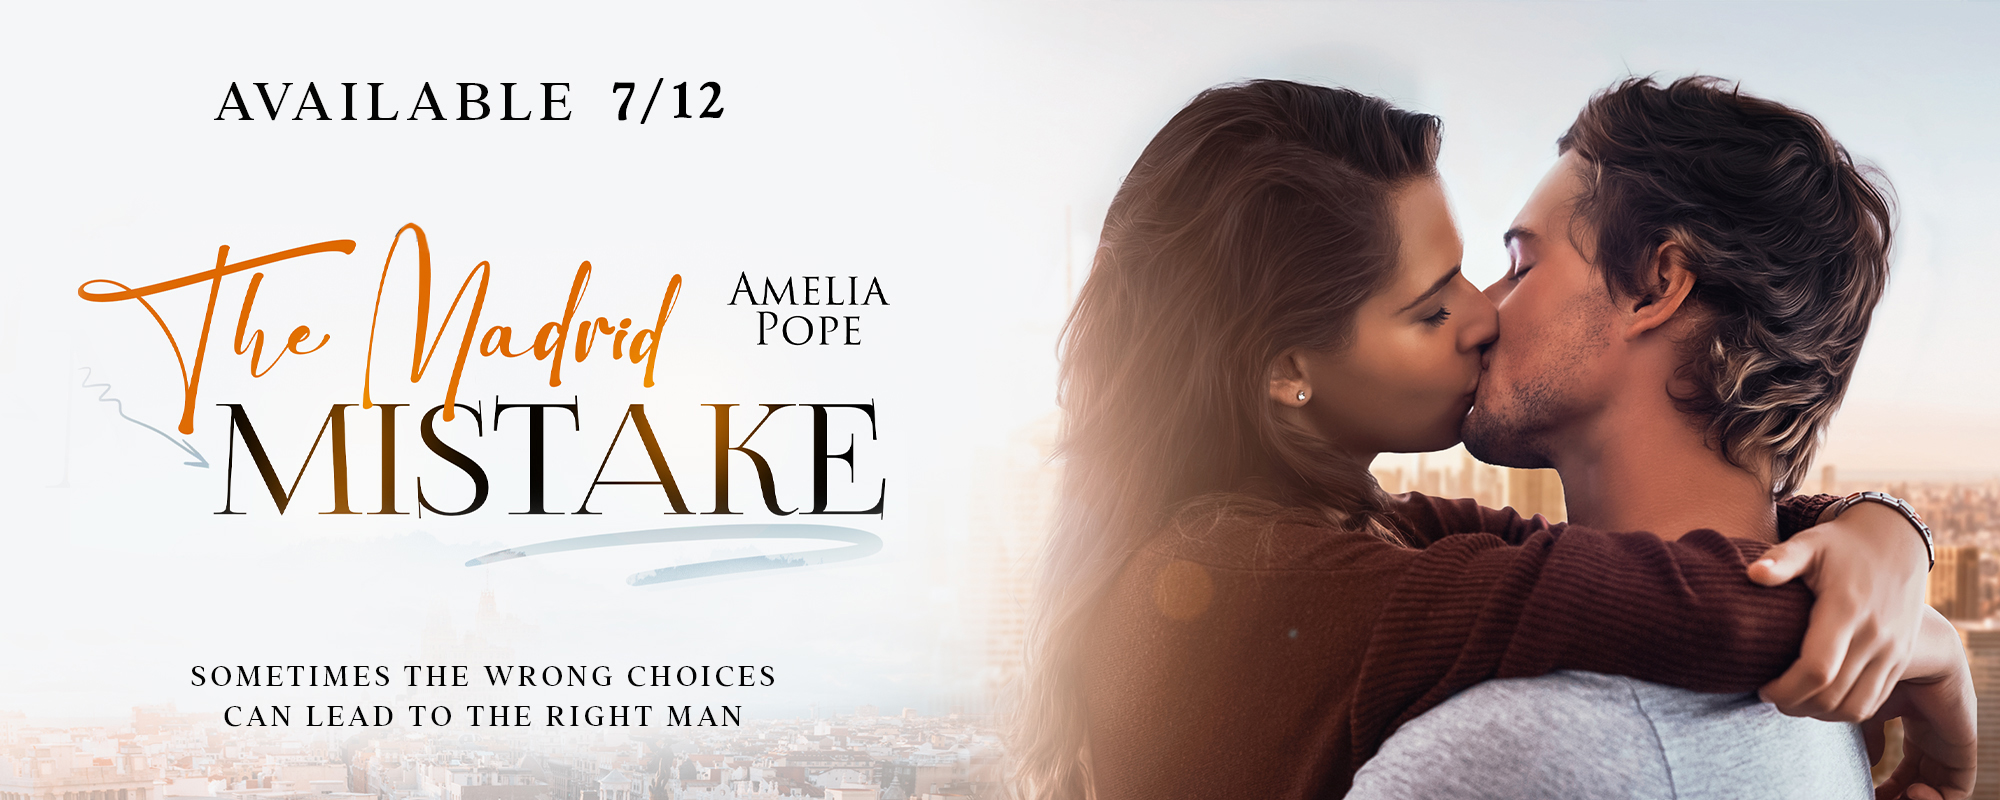 The Madrid Mistake by Amelia Pope, coming soon